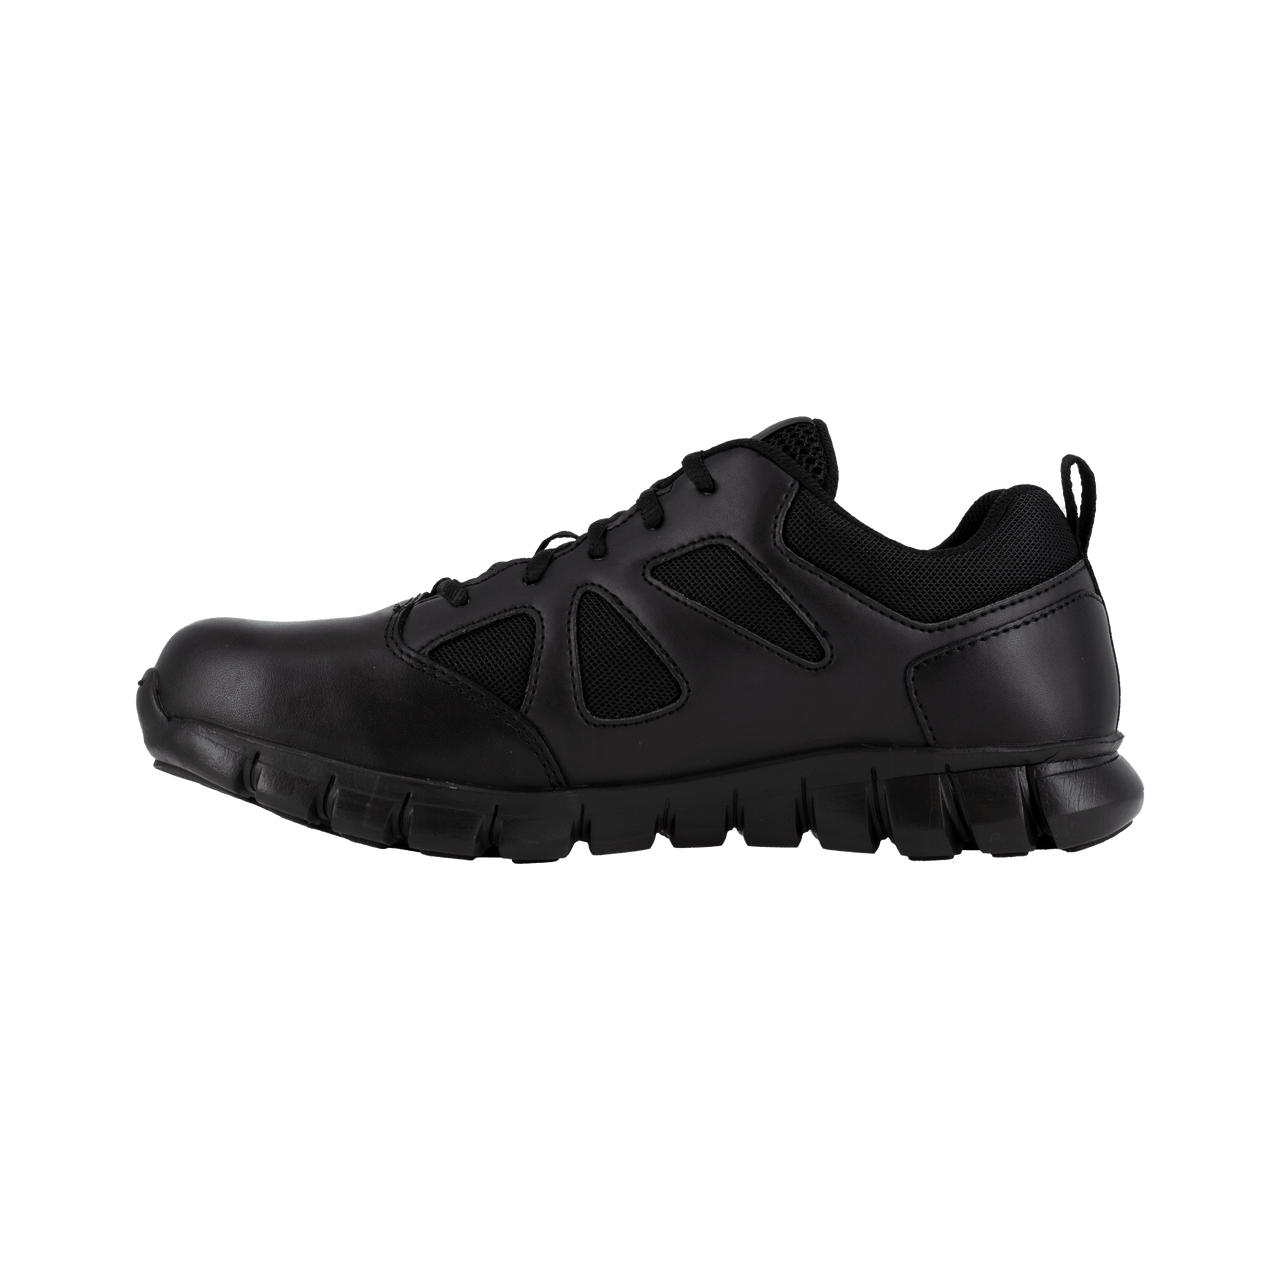 Sublite Cushion Tactical Shoes product image